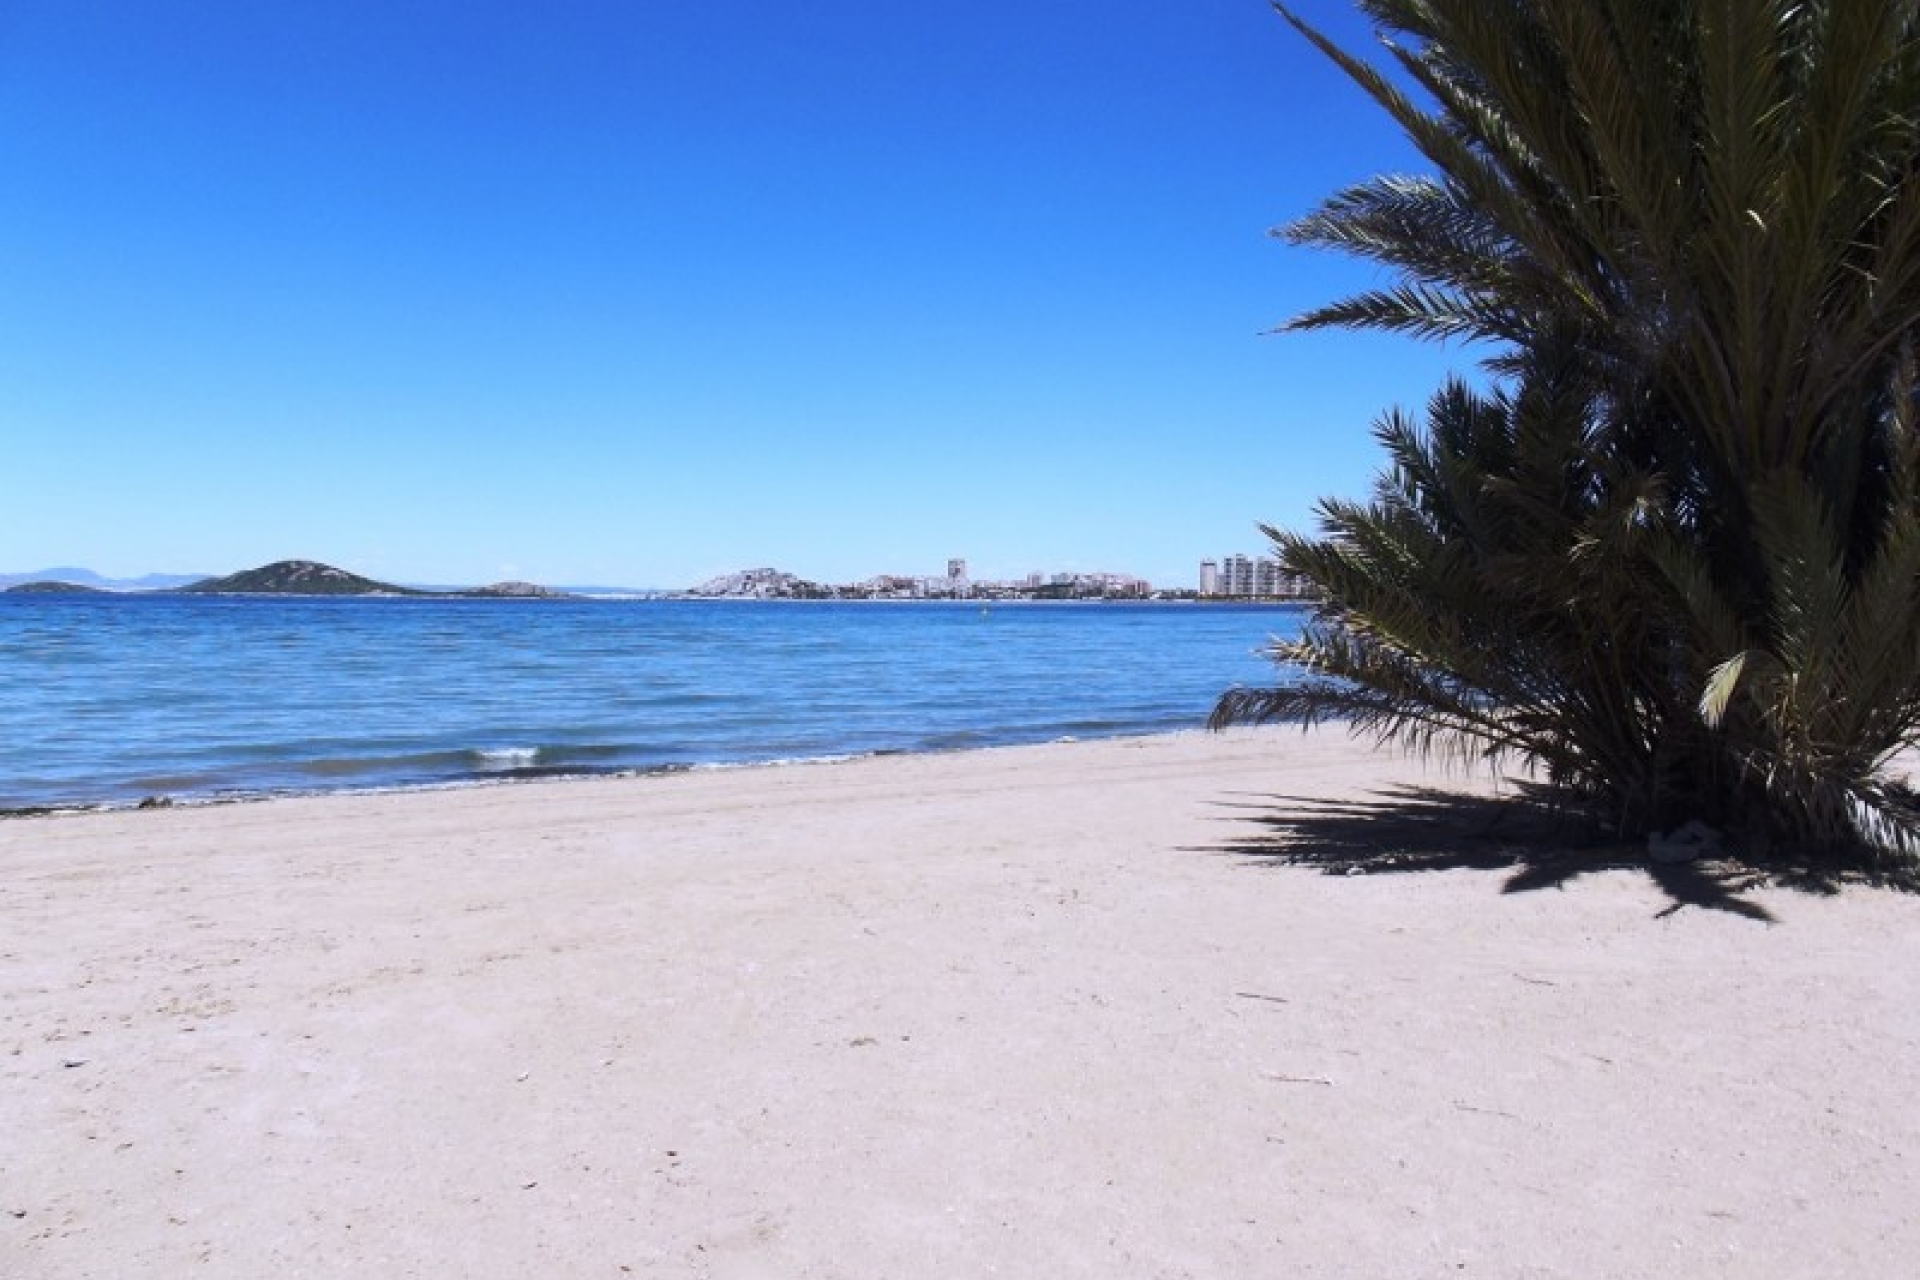 Bargain for sale in La Manga, cheap property in Spain close to Murcia and Cartagena on the Mar Menor